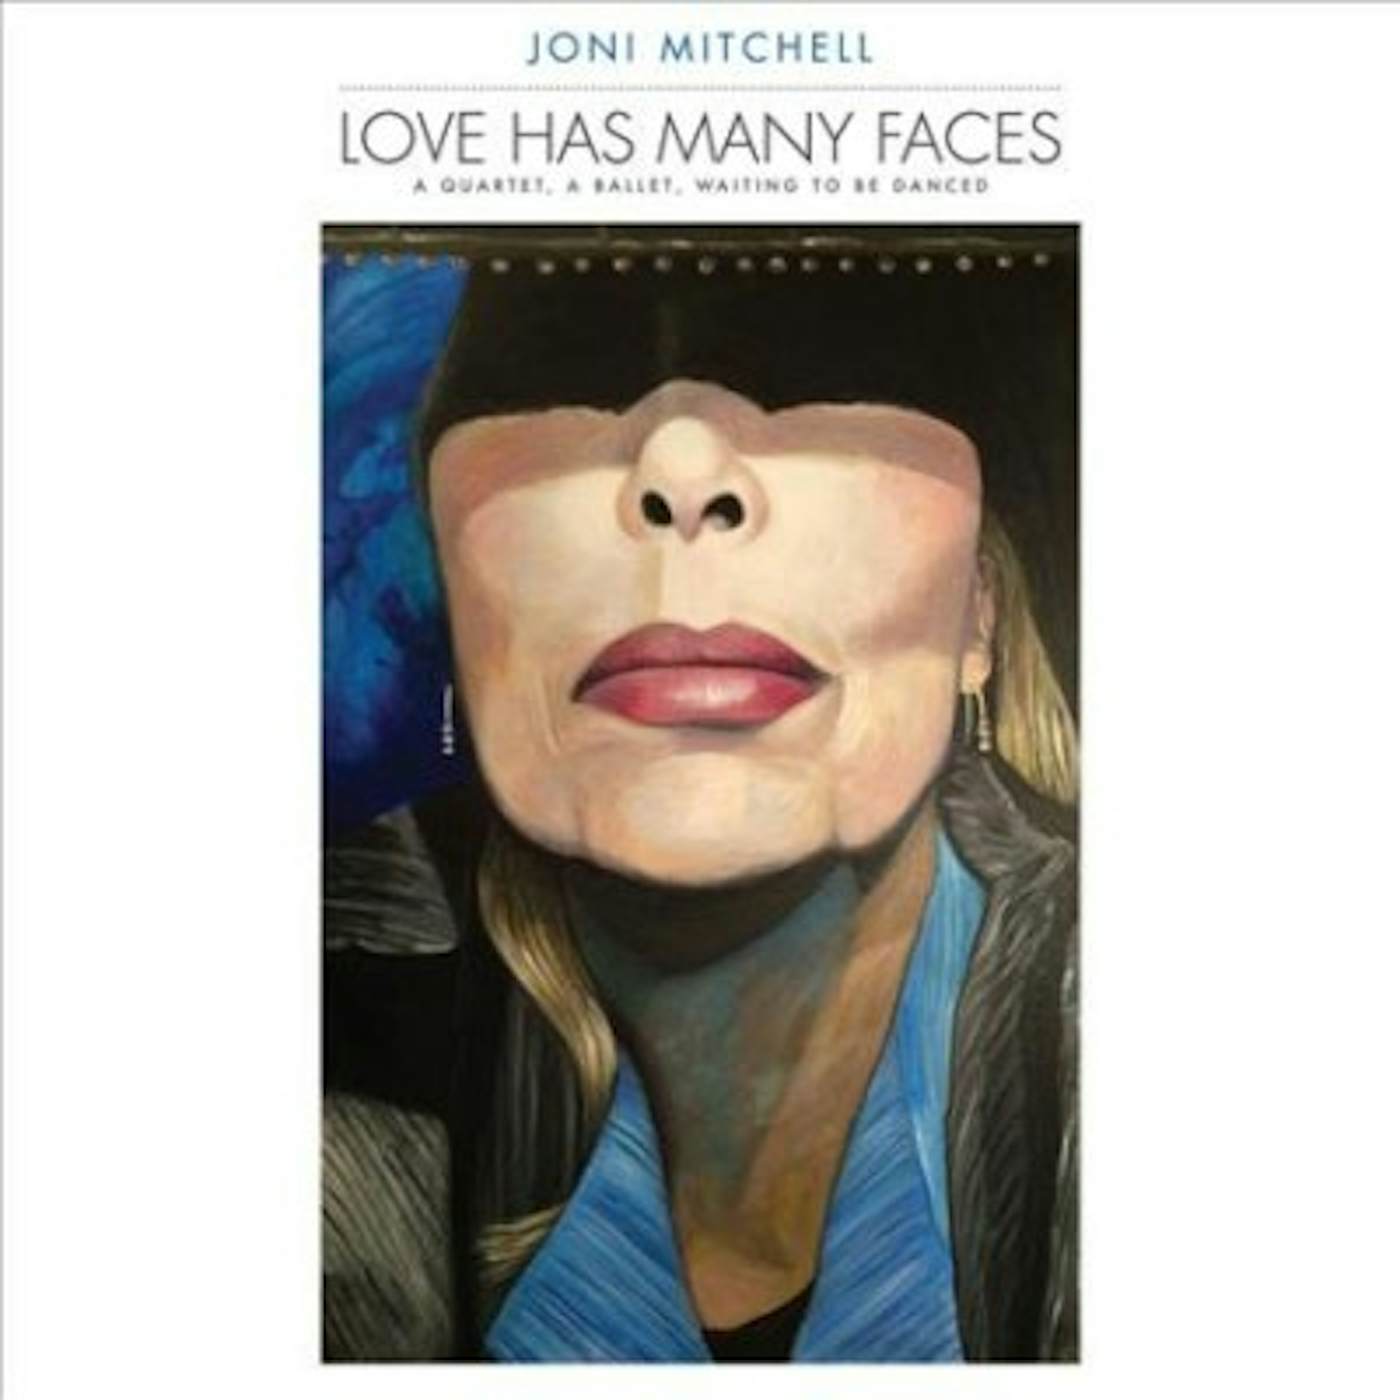 Joni Mitchell LOVE HAS MANY FACES: A QUARTET, A BALLET, WAITING TO BE DANCED (8LP/180G) Vinyl Record